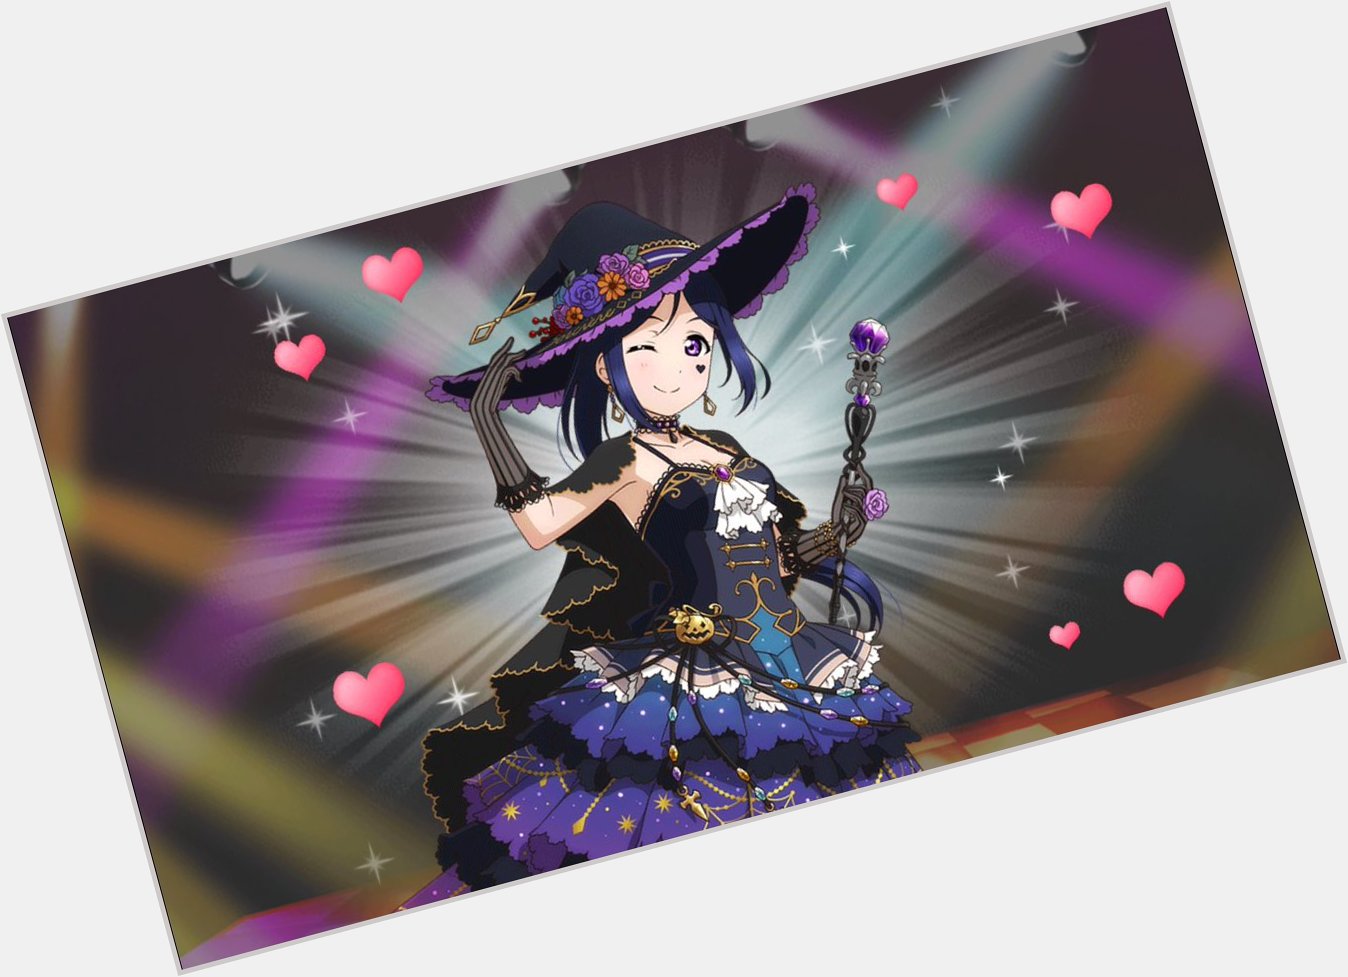 Today was the perfect day to seal idolize one of my favorite aqours srs. happy birthday kanan matsuura! 